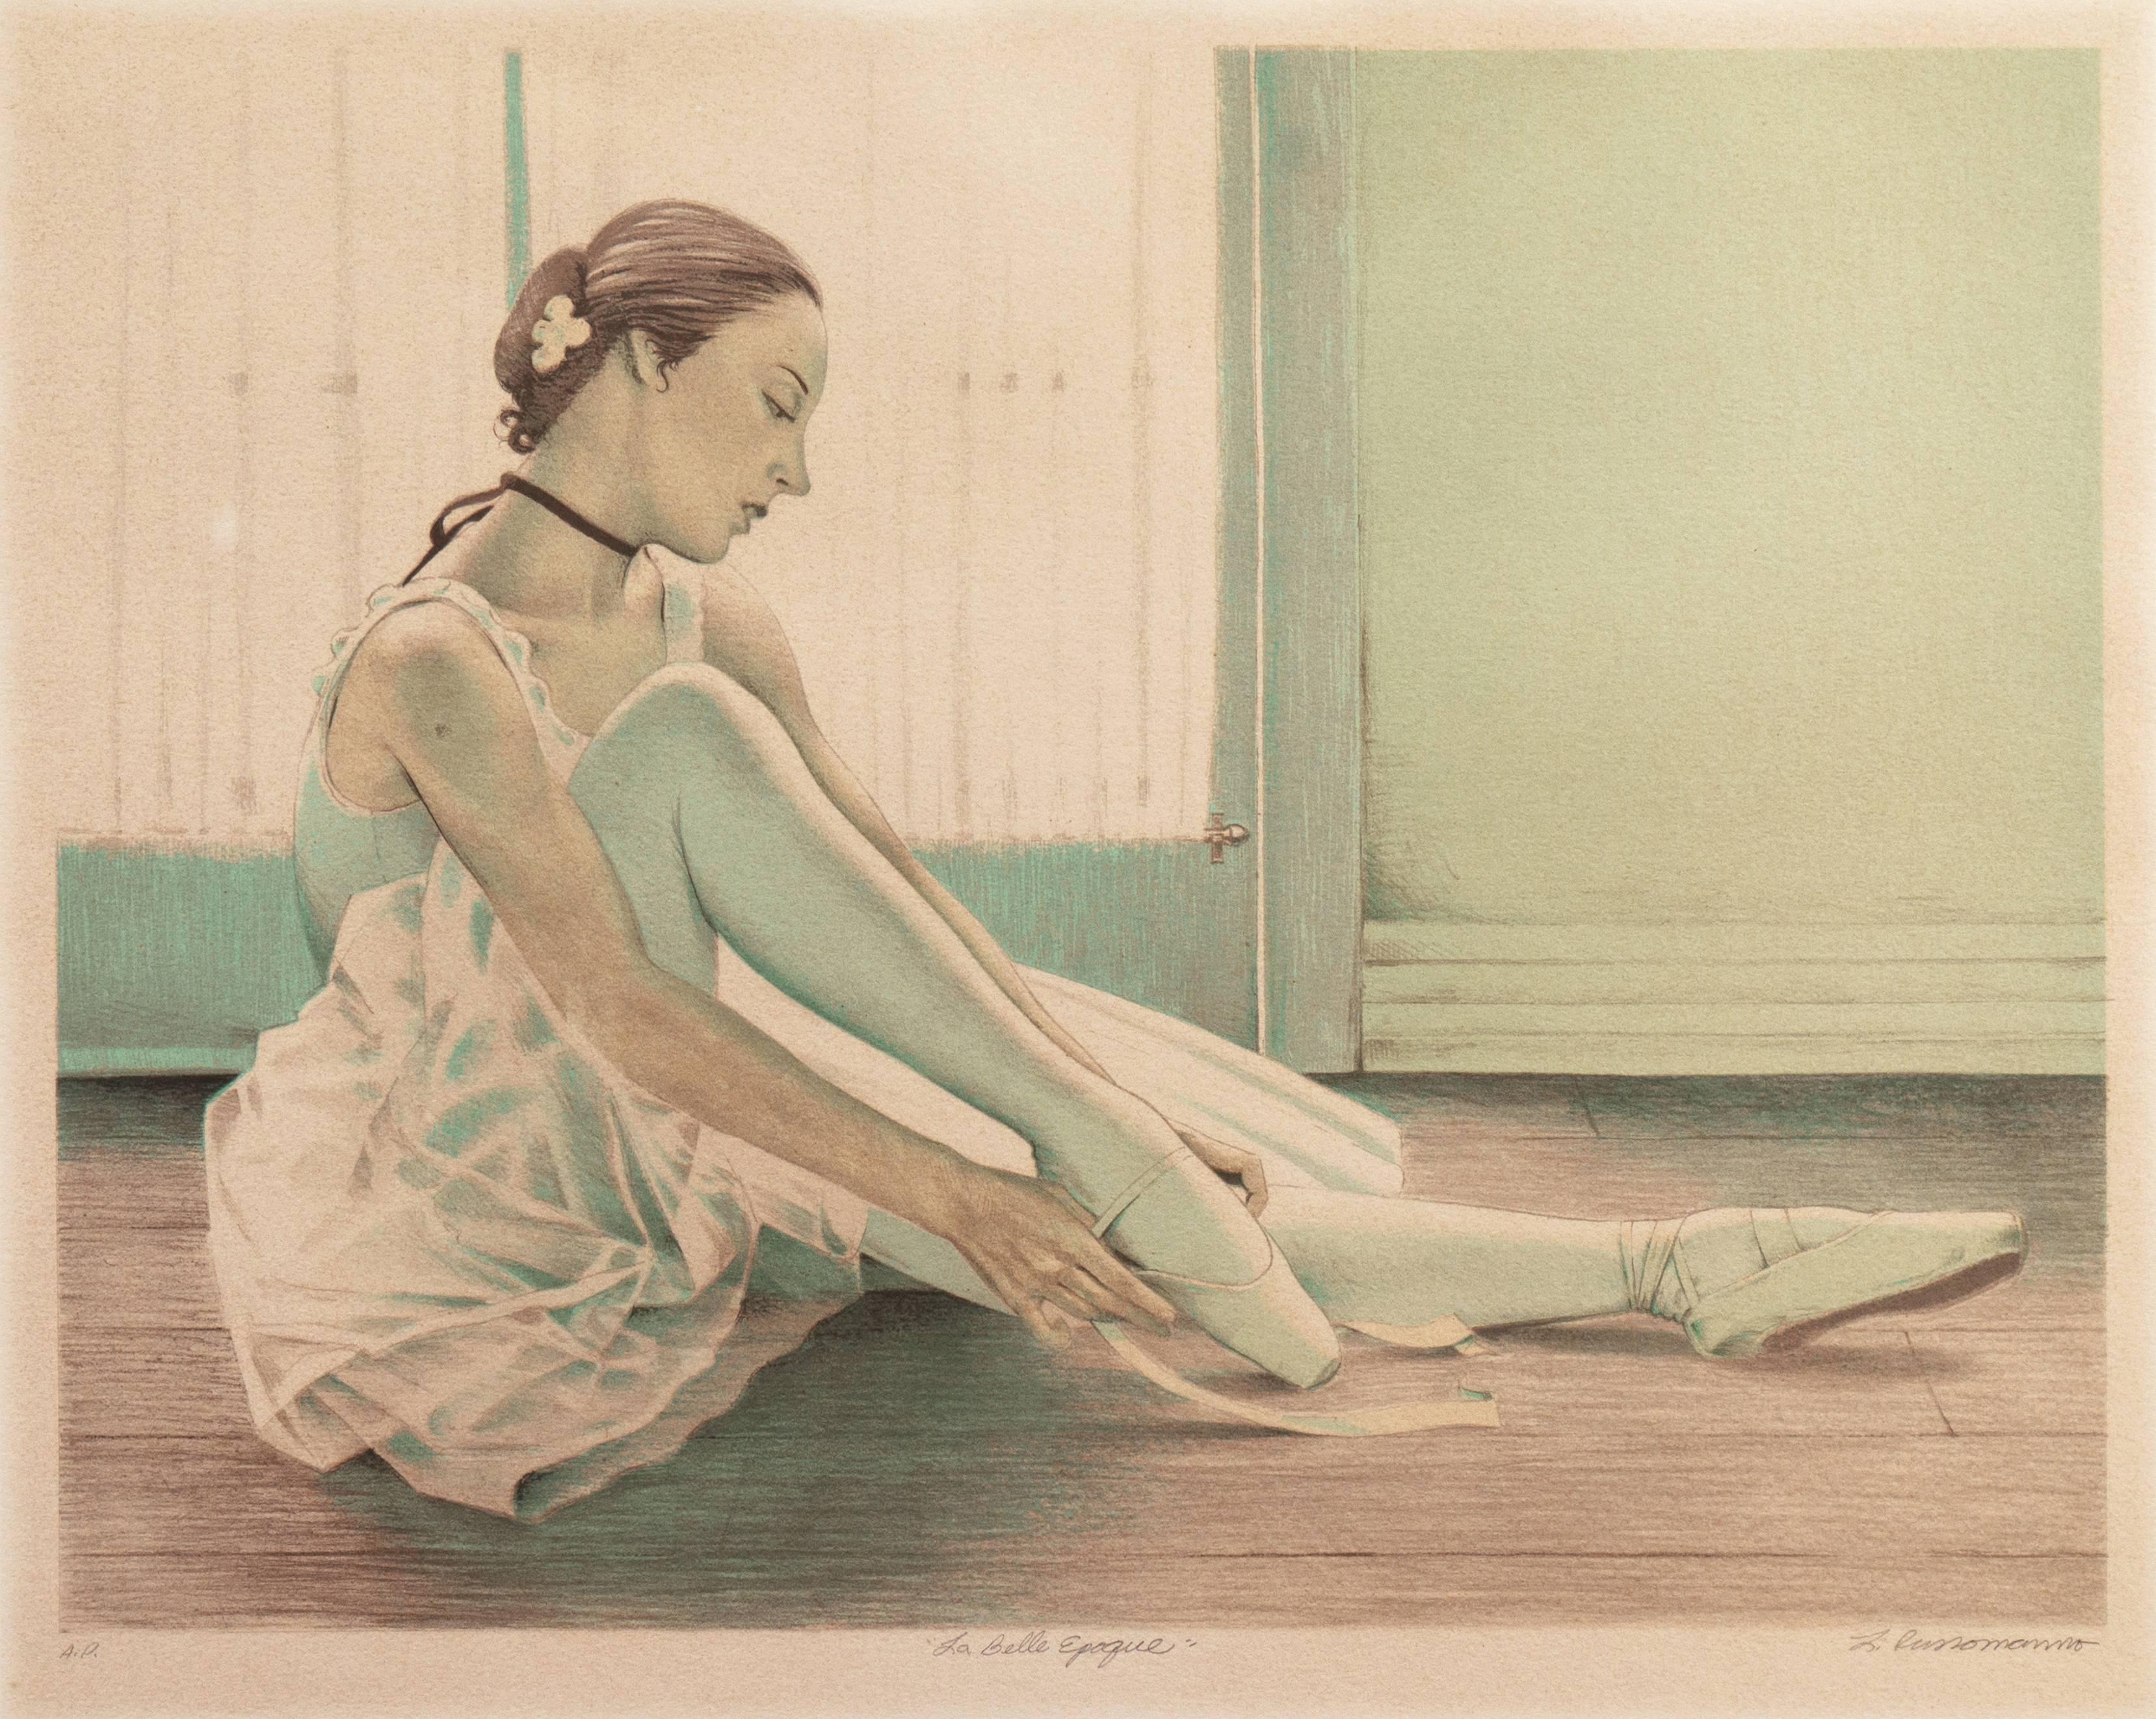 'Young Ballerina', American Impressionist, National Academy of Design, New York - Print by Louis Russomanno